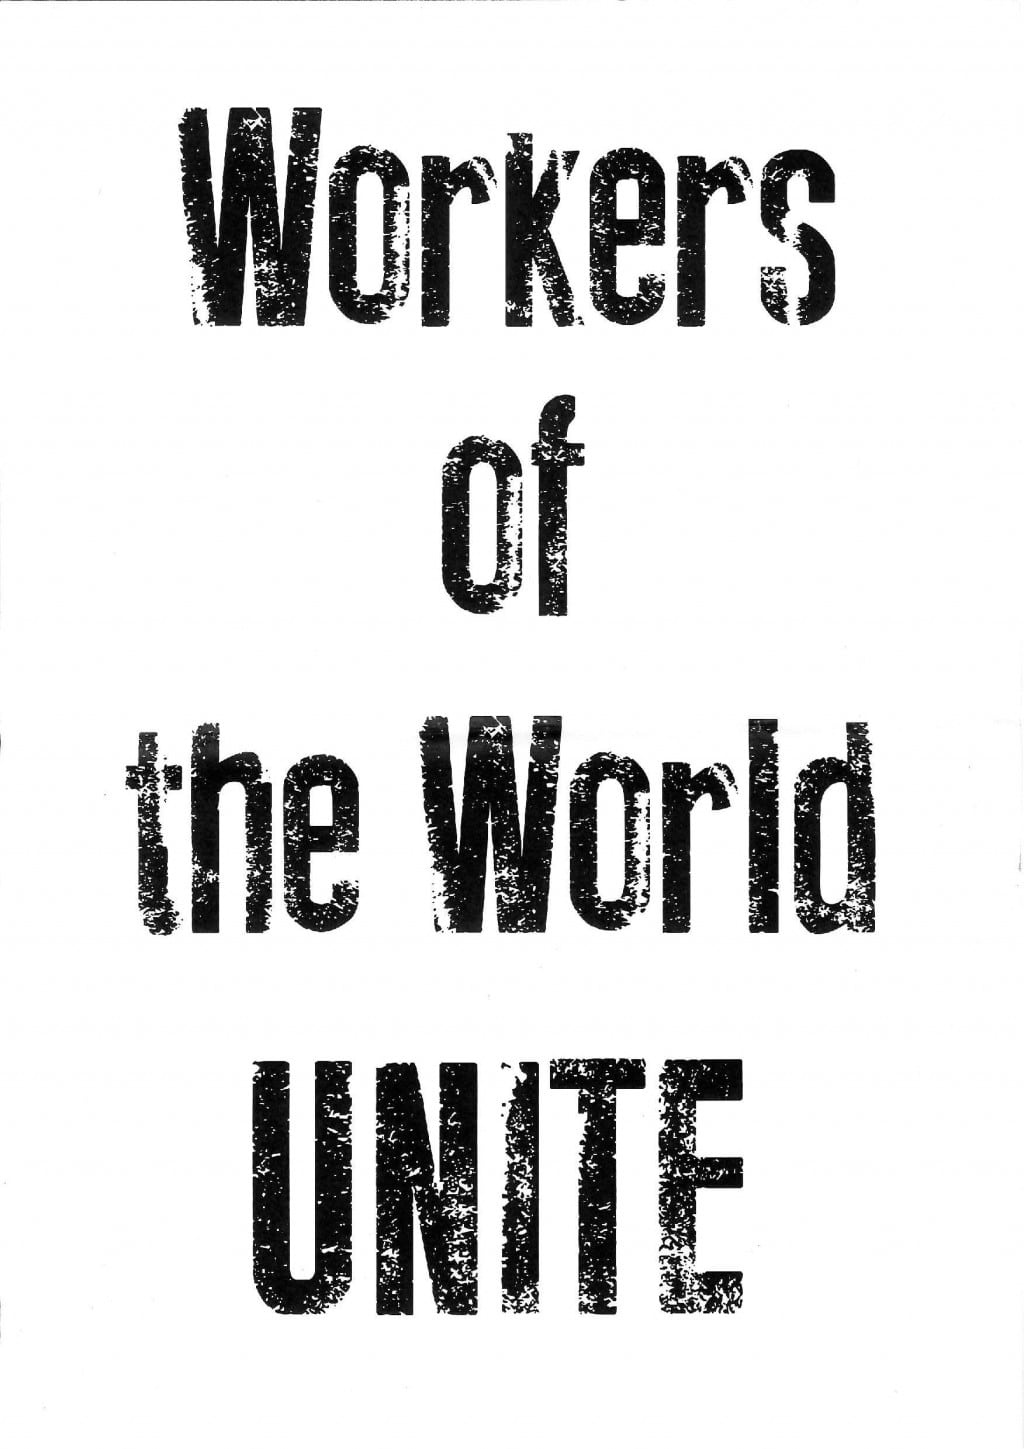 Fly poster for Dead Dog in a Suitcase. Text based design. Four lines of black text on a white background, with the words 'Workers of the world unite'. The word 'Unite' is written all in capitals making it stand out. The ink on the text seems uneven, giving it a hand printed feel.